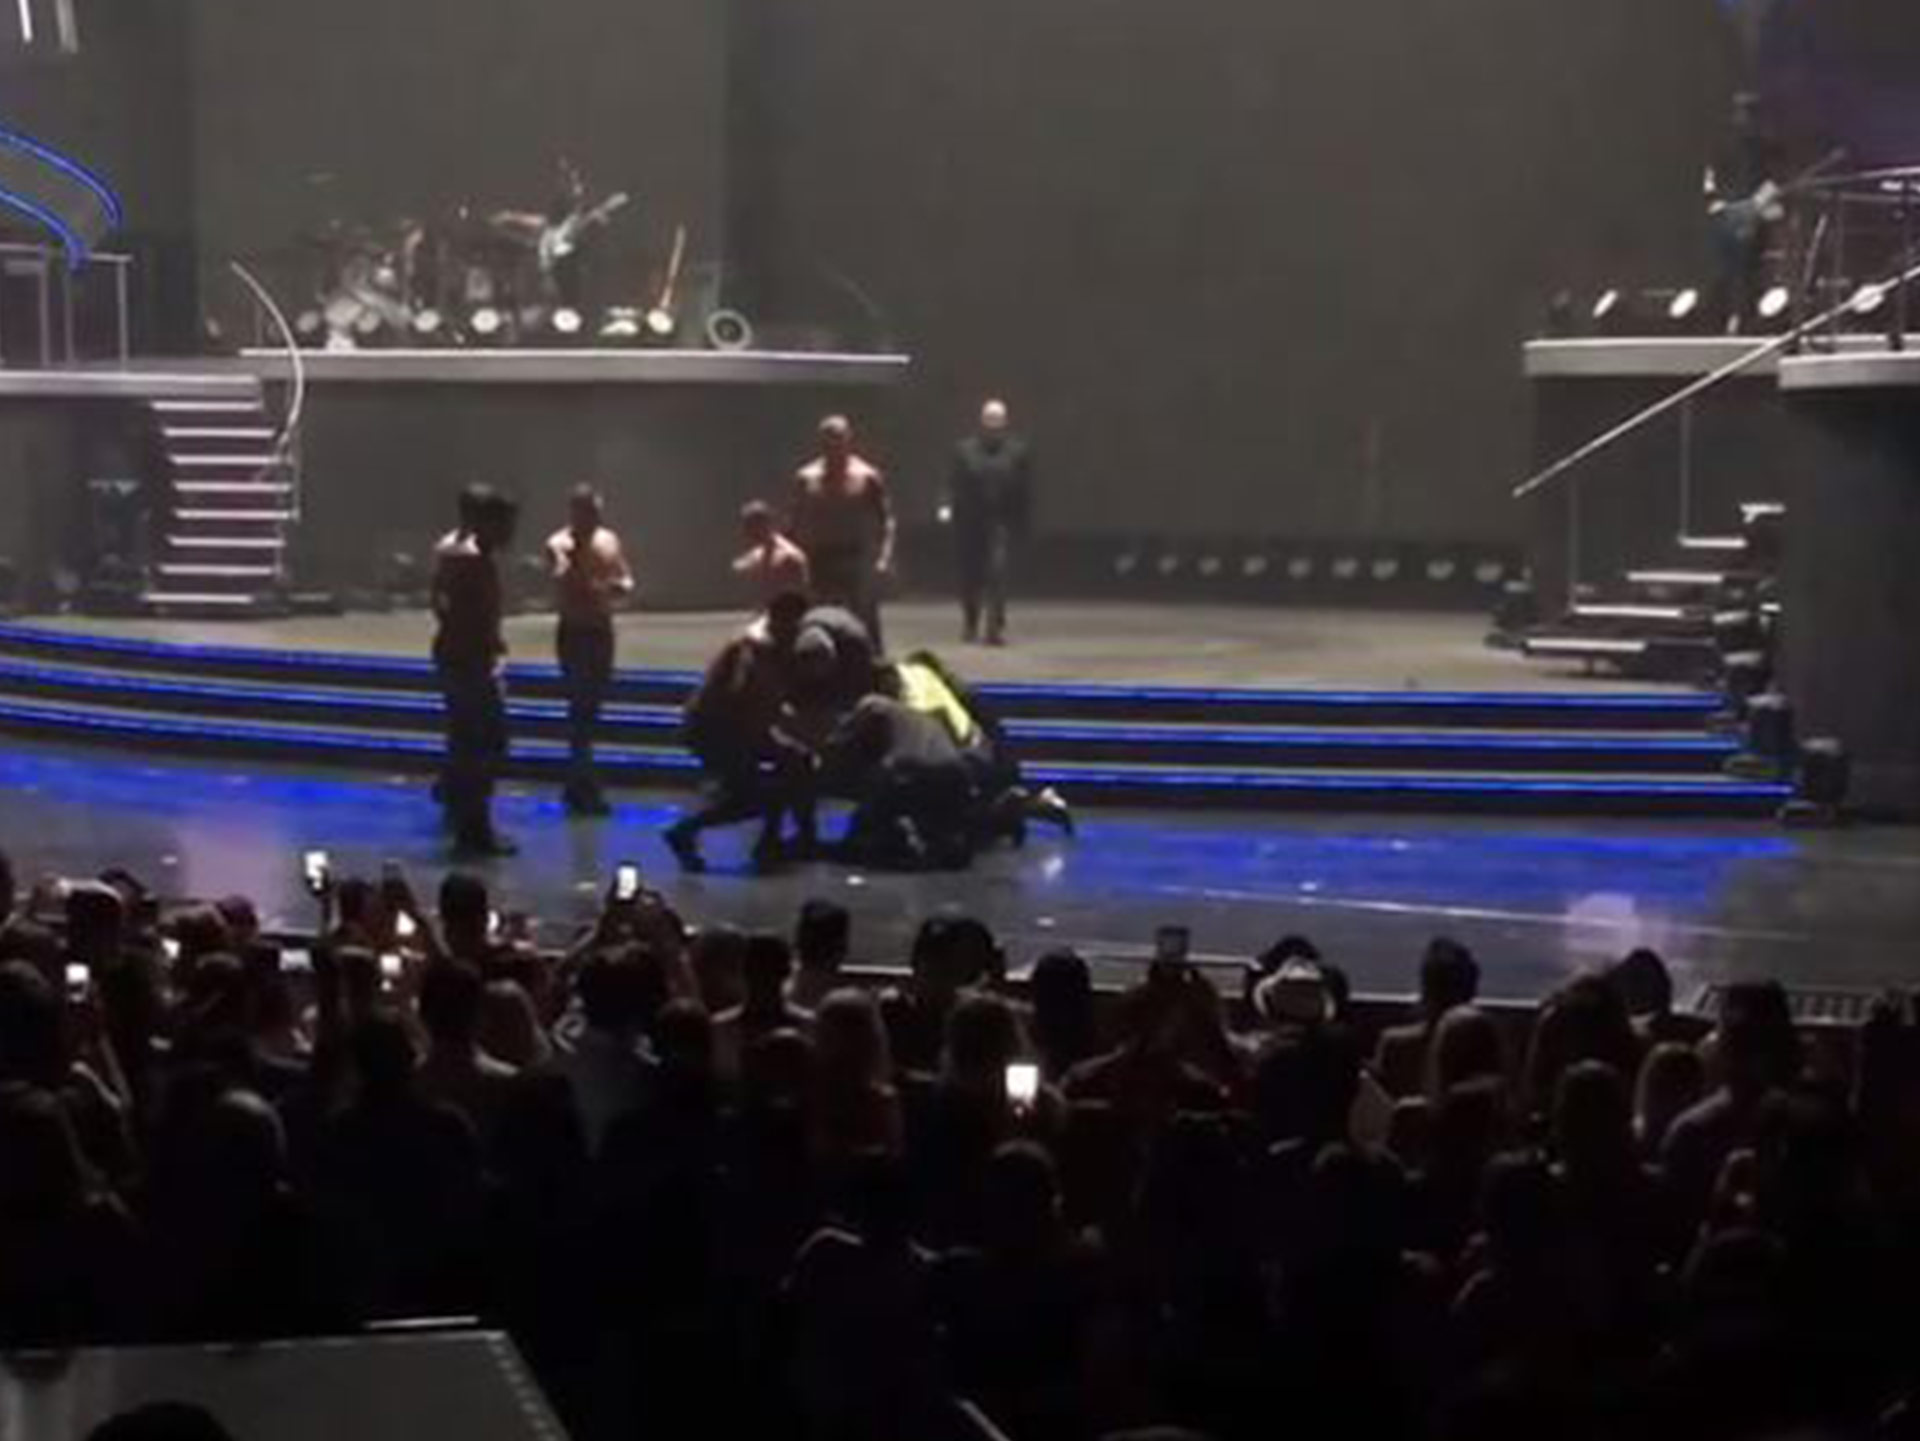 Britney Spears shaken after man rushes stage during Las Vegas concert